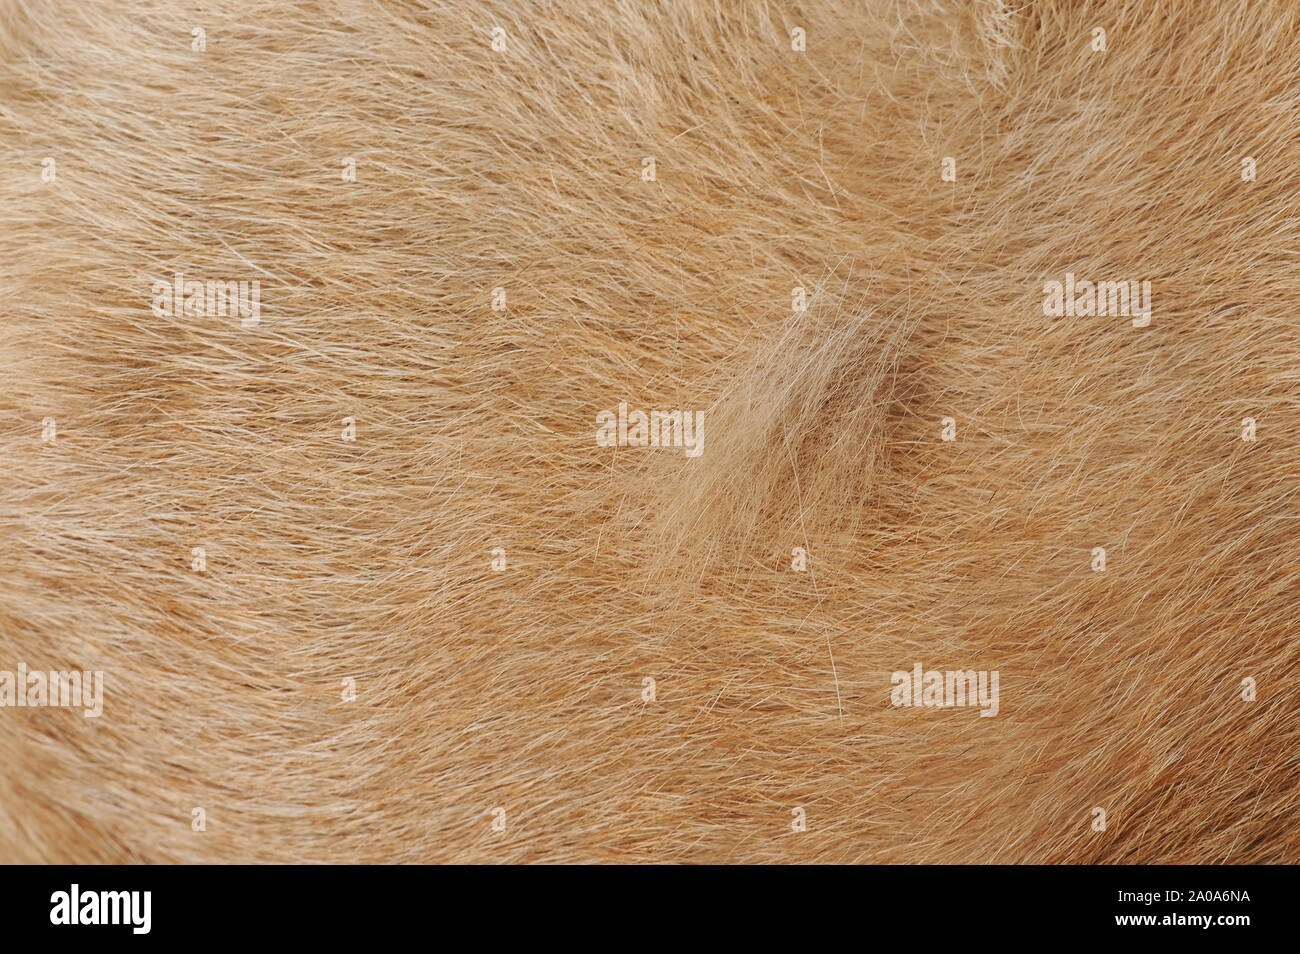 Losing dog hair theme close up view on fur background Stock Photo